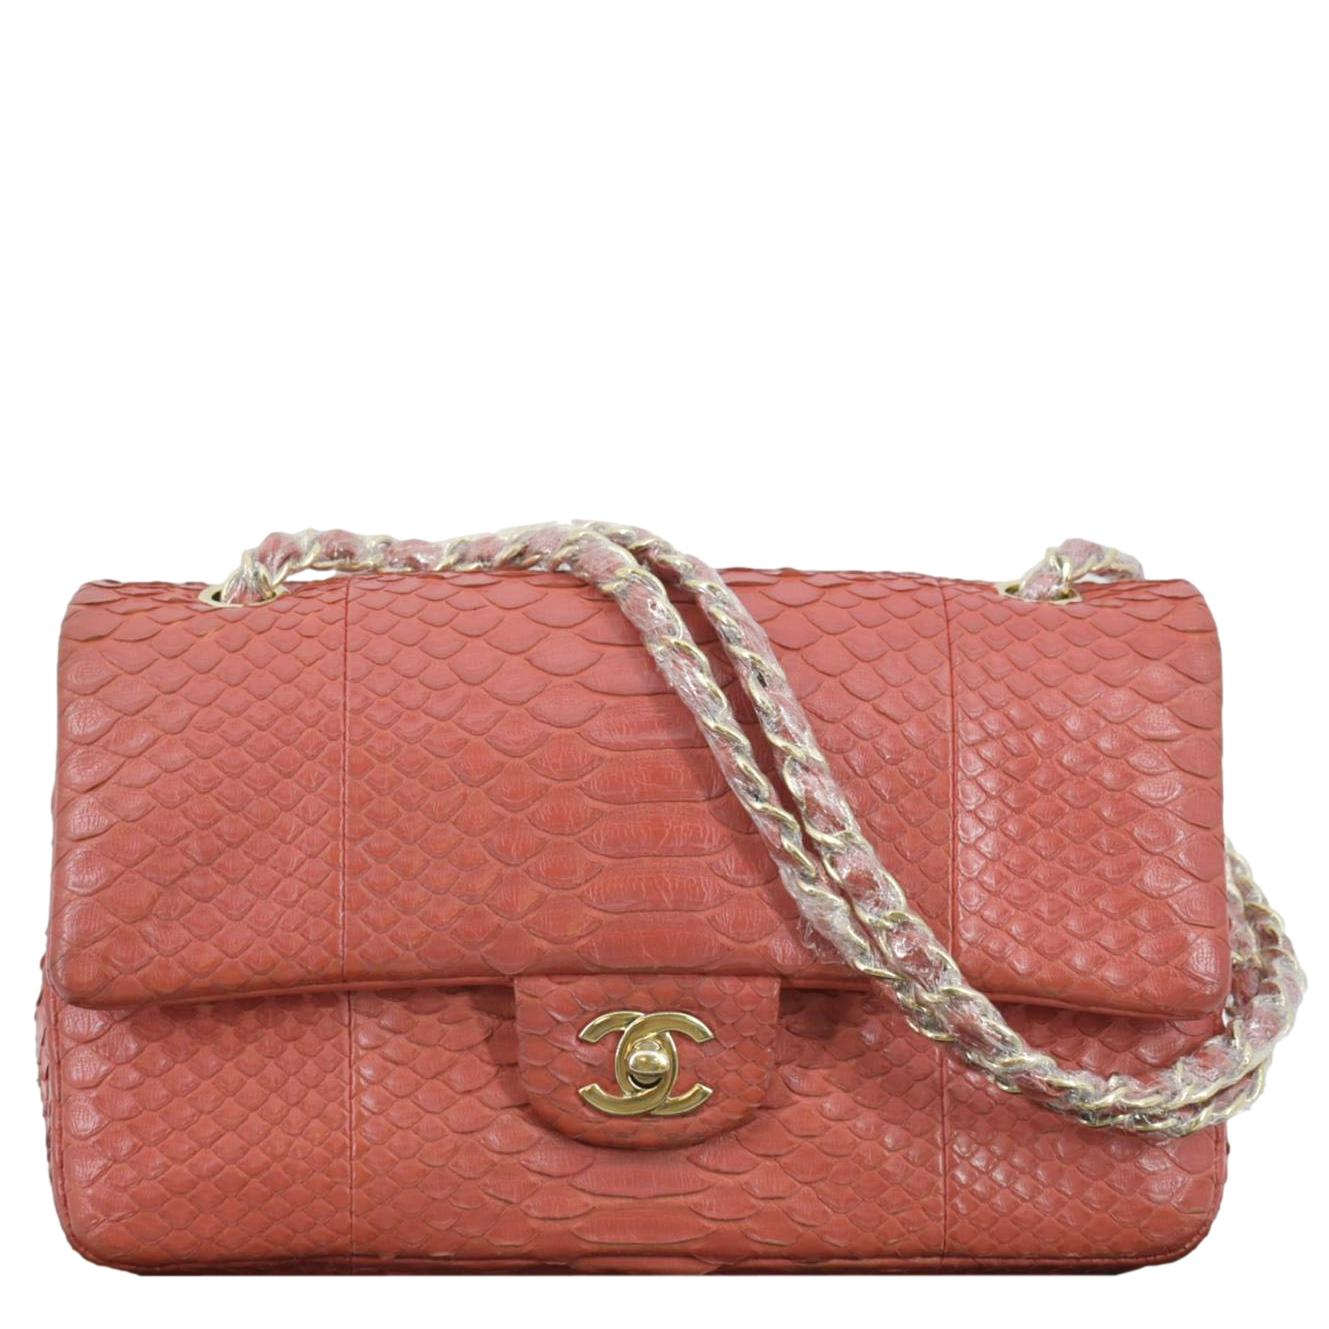 Chanel Classic Medium Double Flap Python Leather Shoulder Bag Red